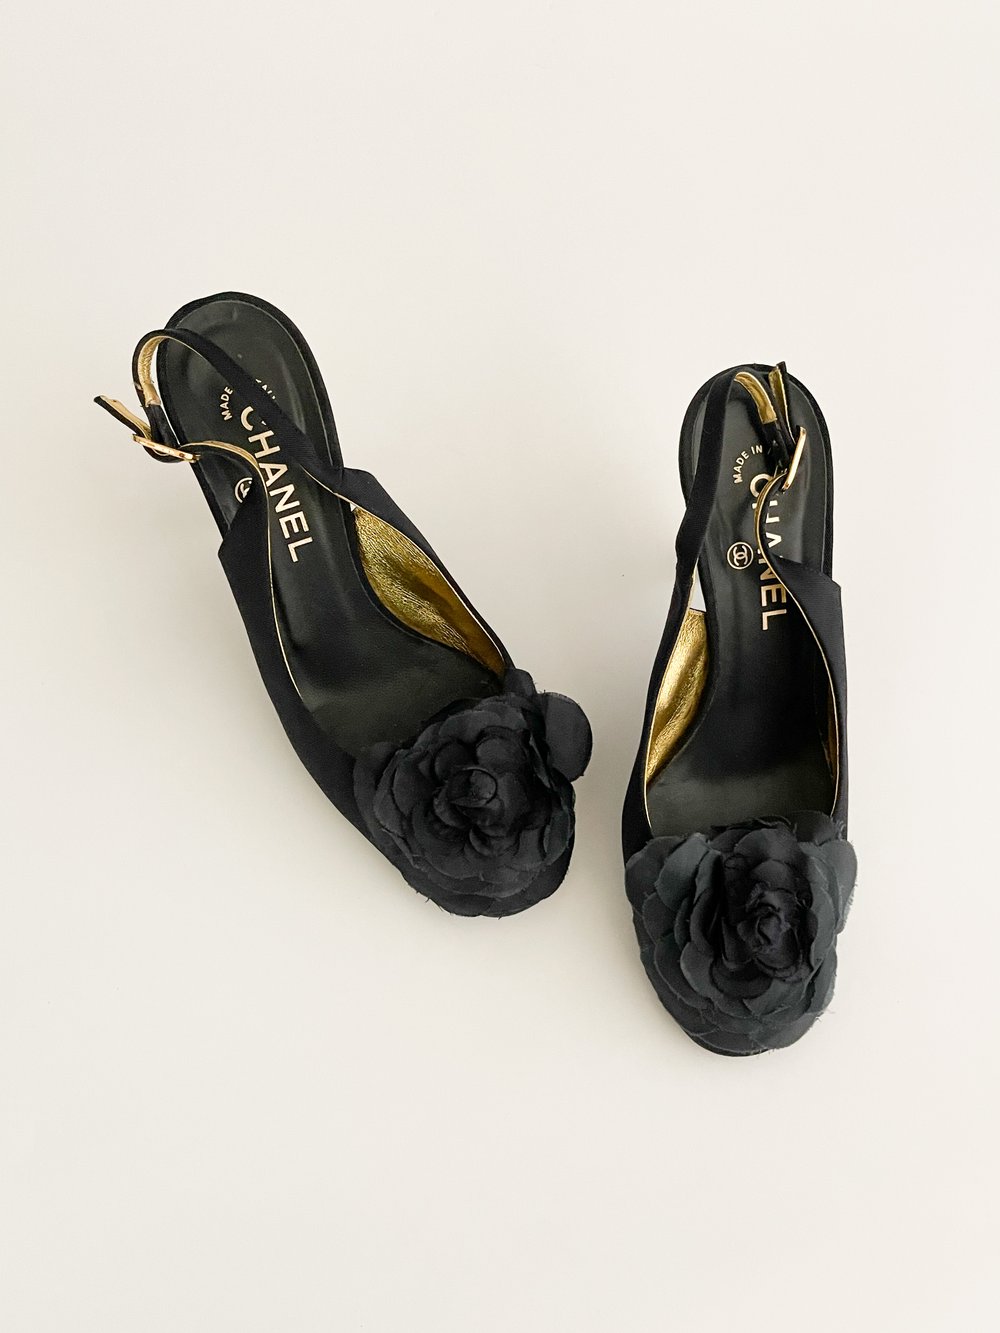 Chanel Black Leather Pumps with Camellia